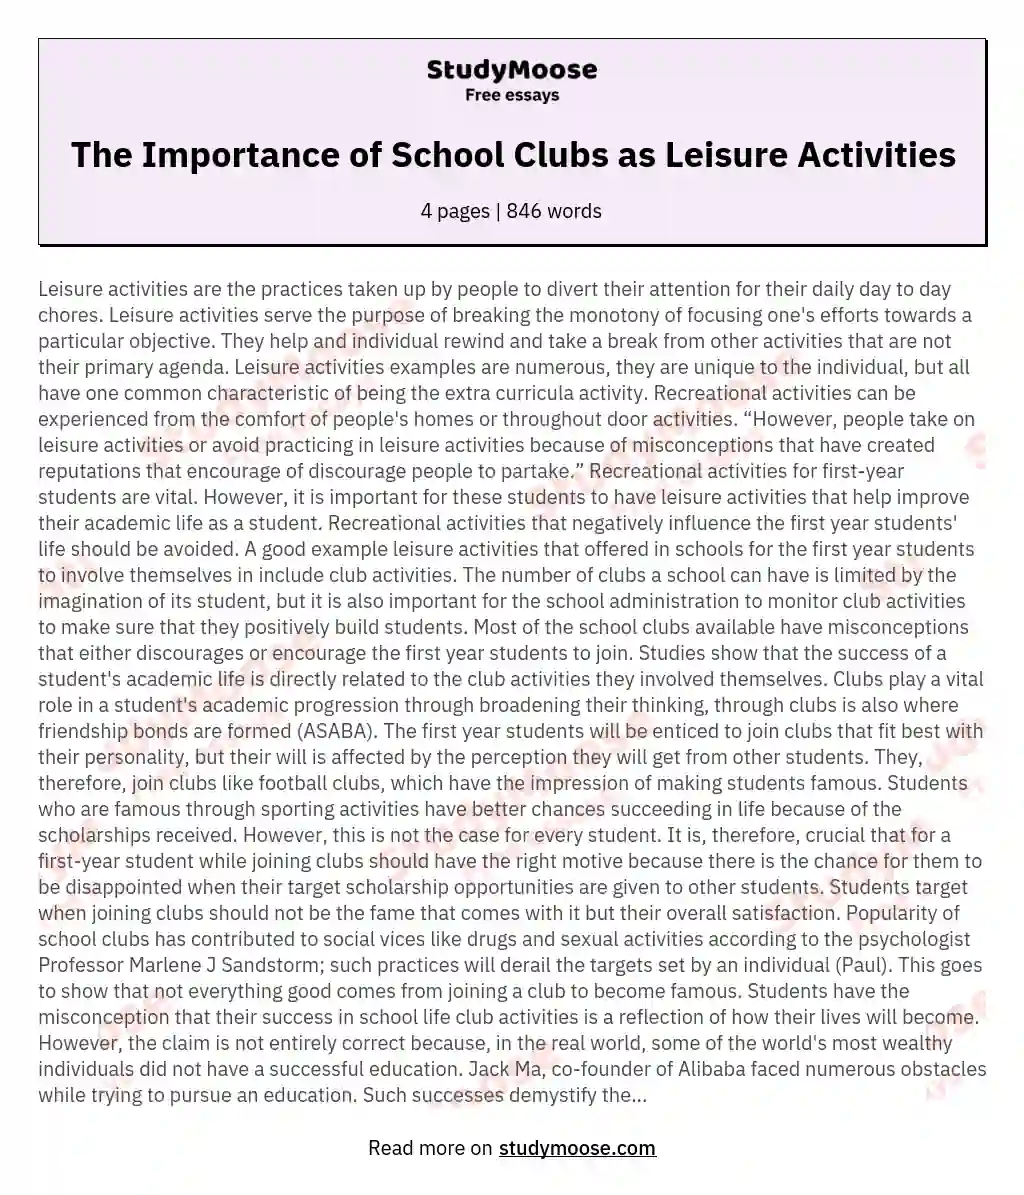 The Importance of School Clubs as Leisure Activities essay